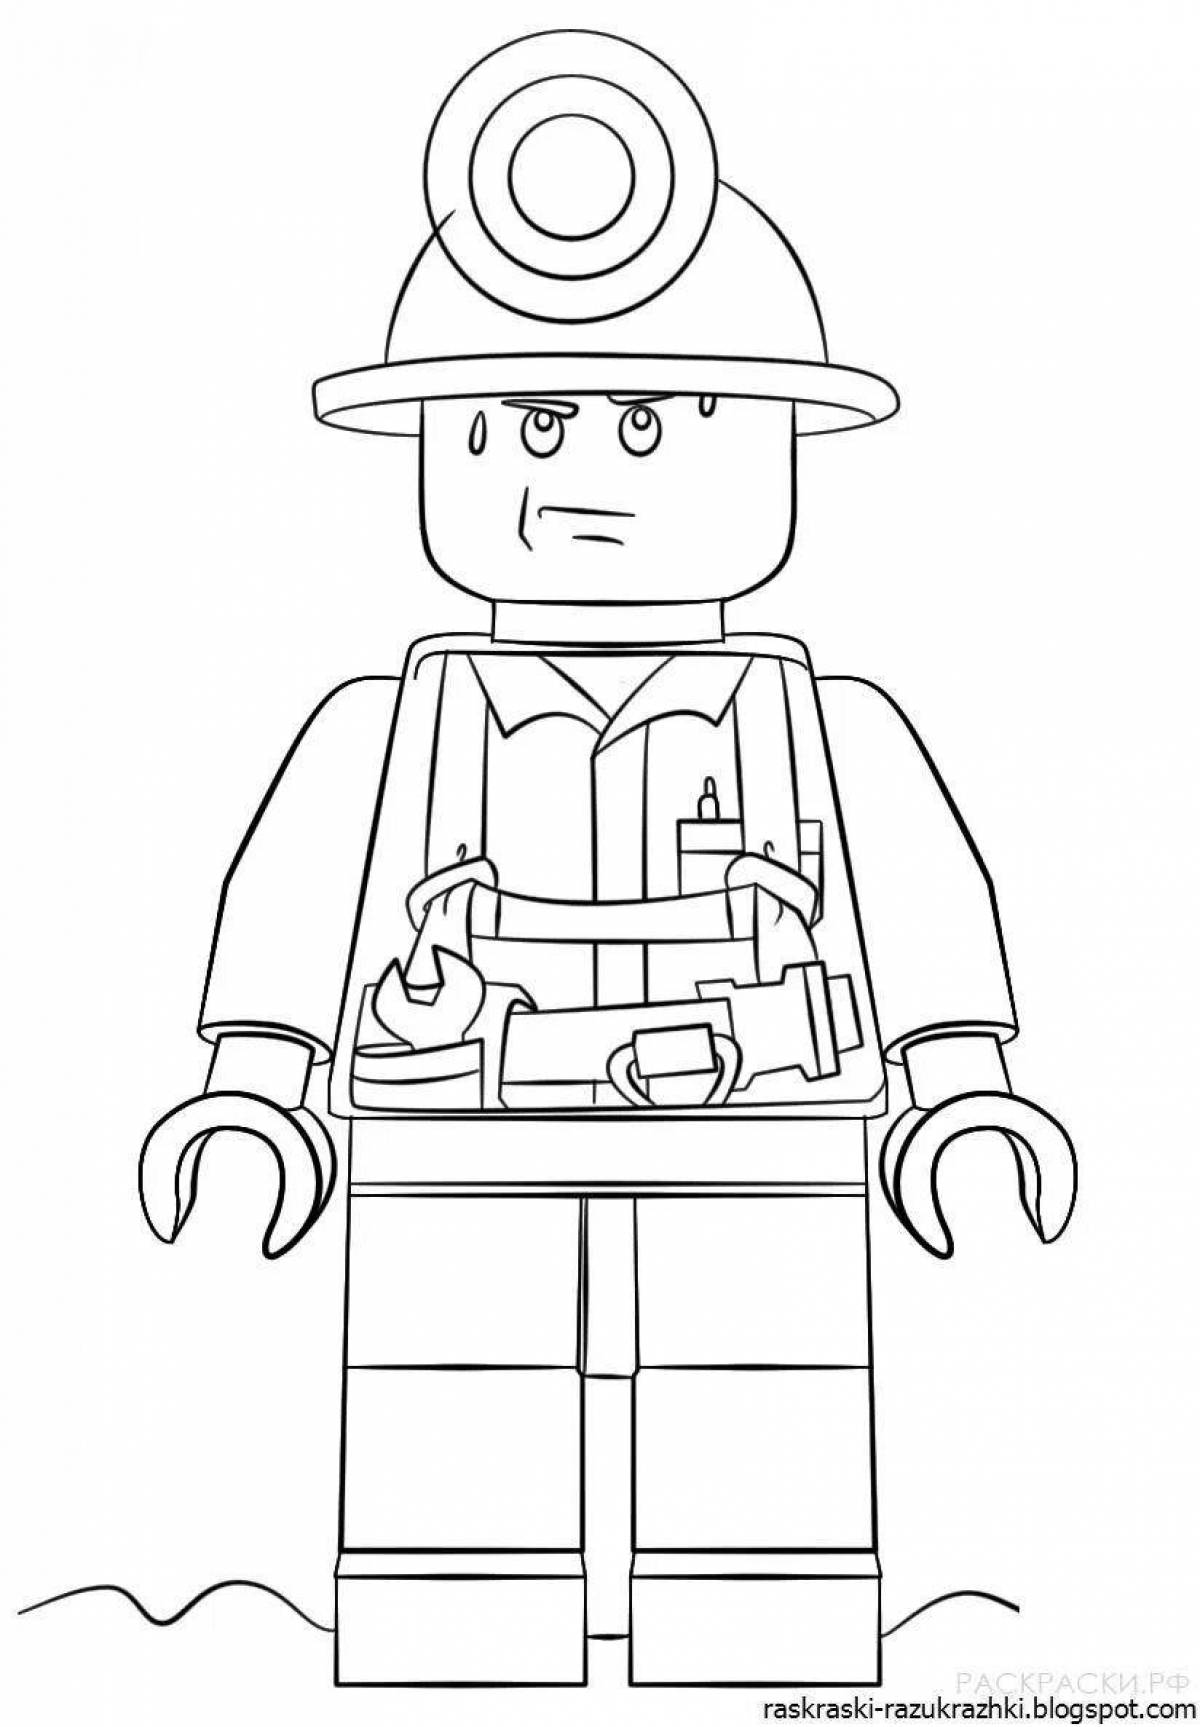 Fun toy soldiers lego coloring book